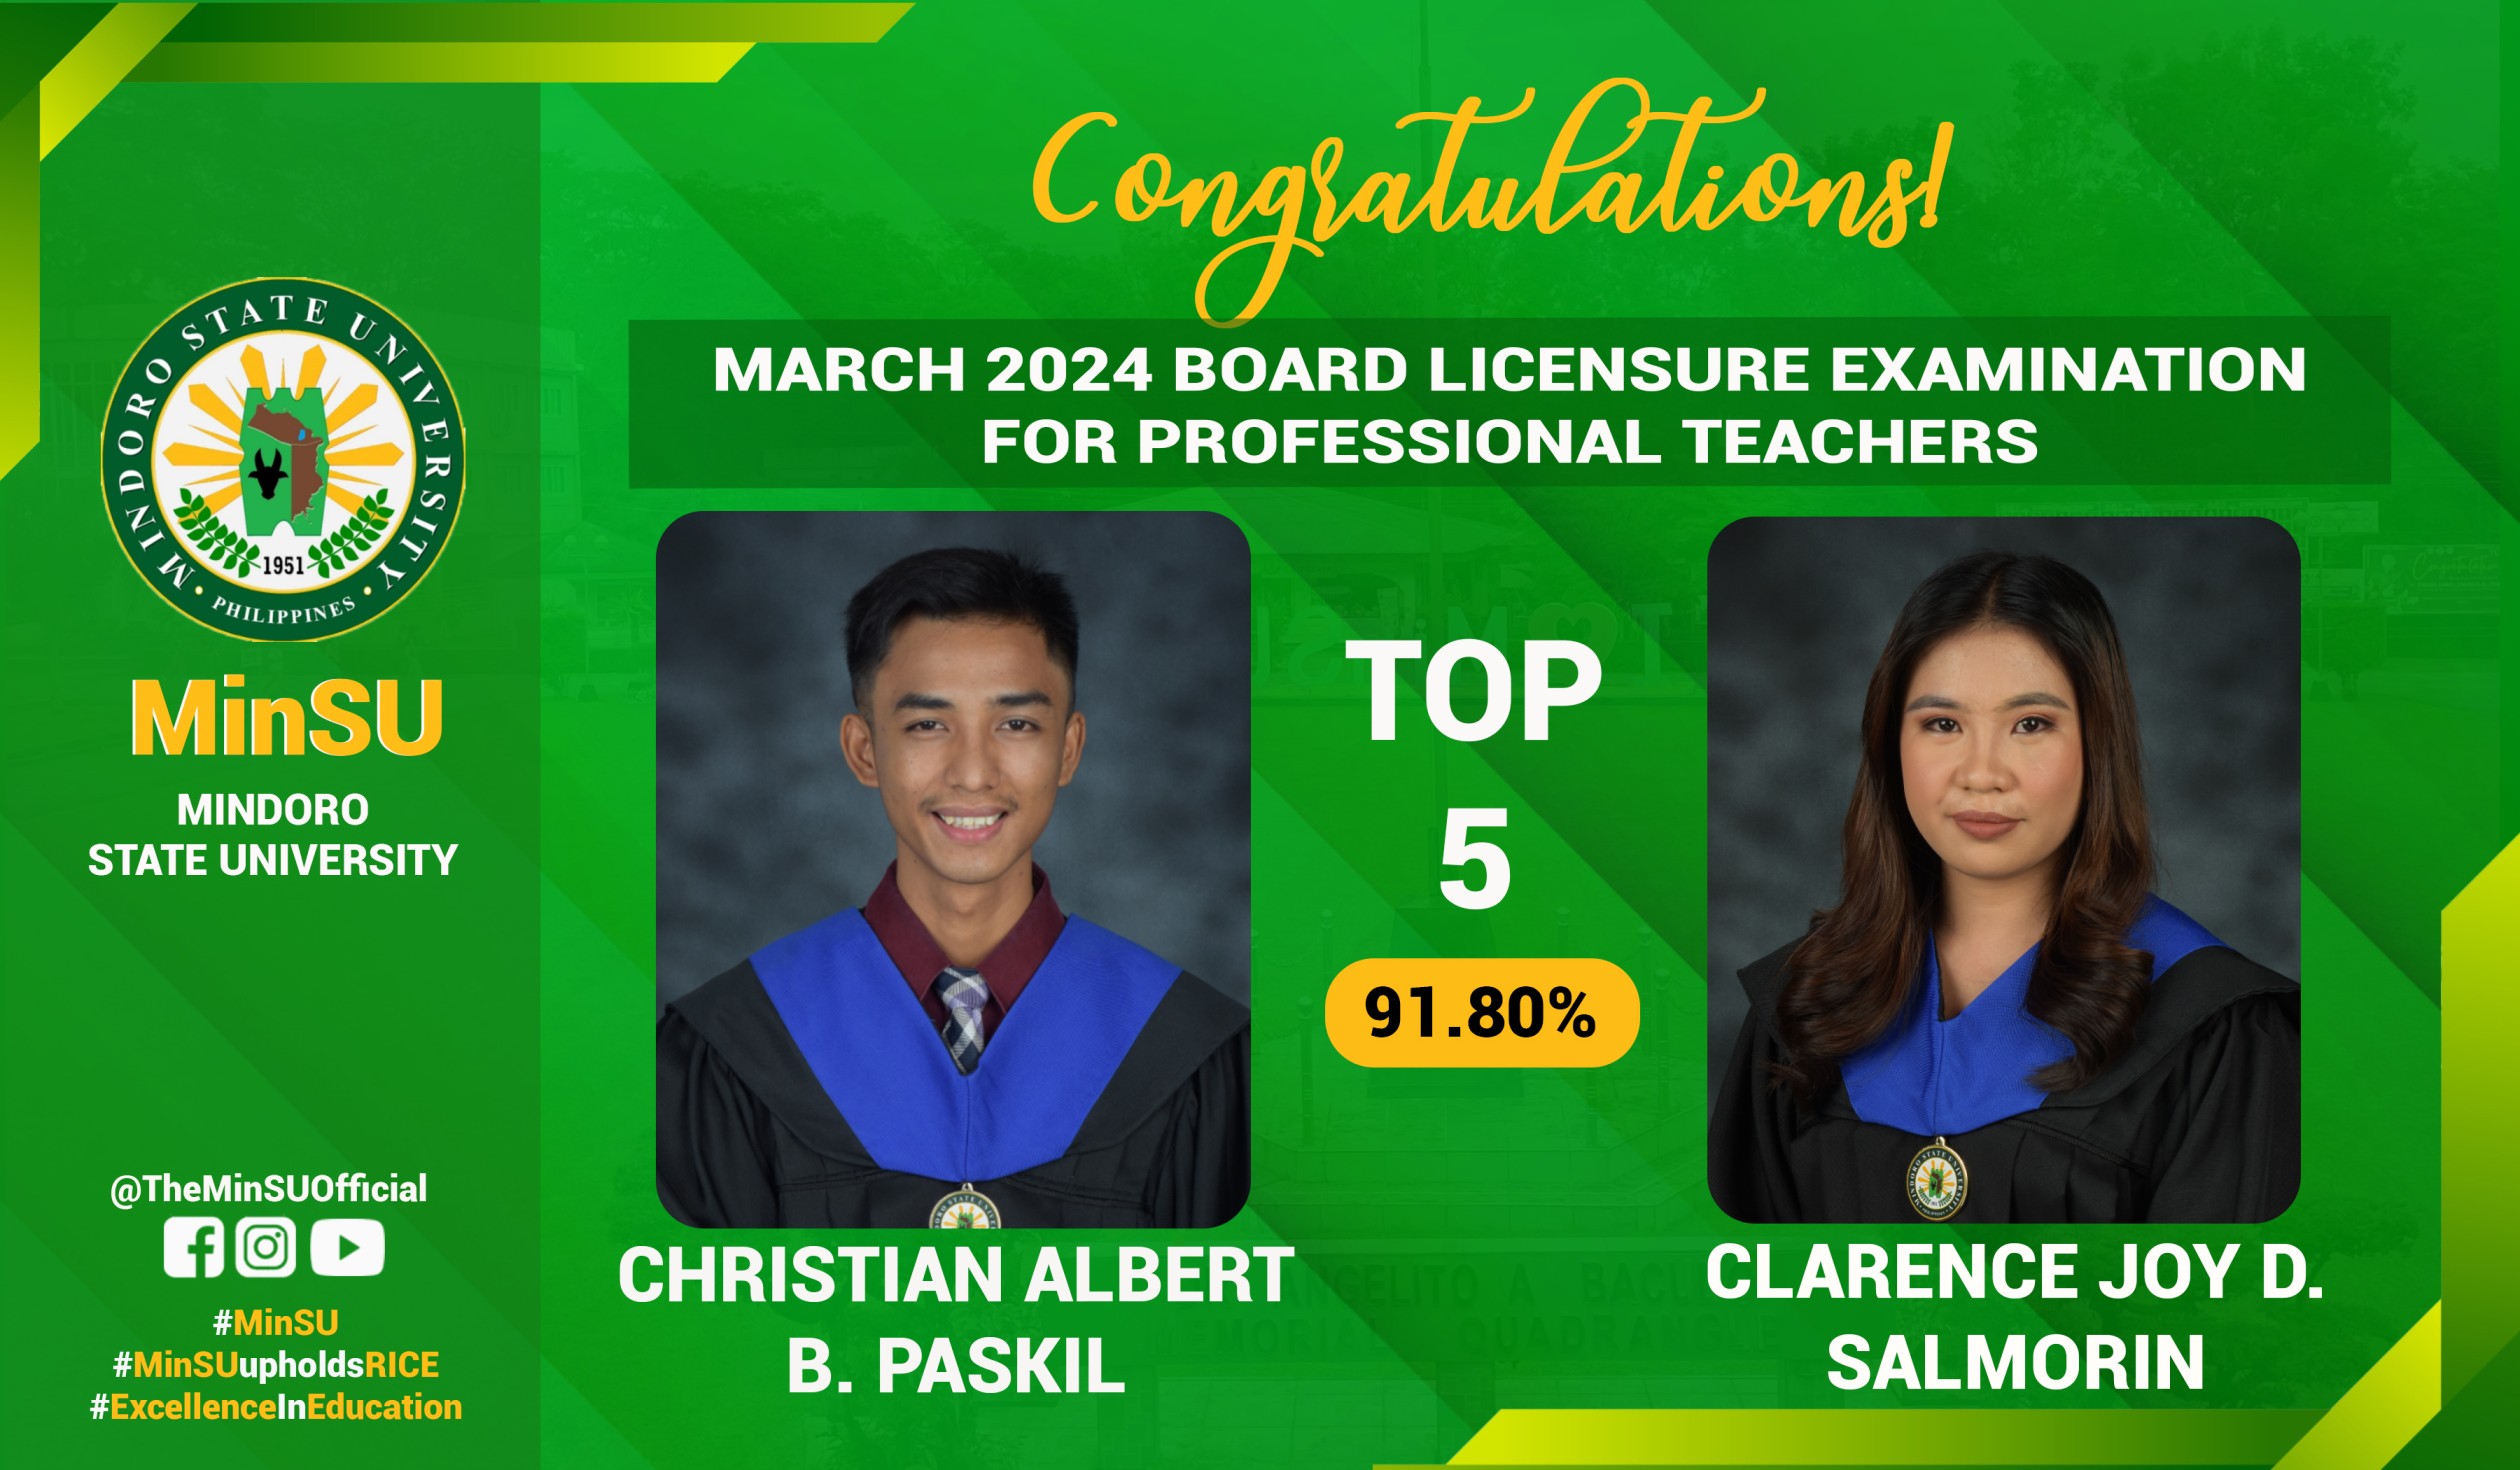 MinSU Produces Two Top Notchers in the March 2024 Licensure Examination for Teachers